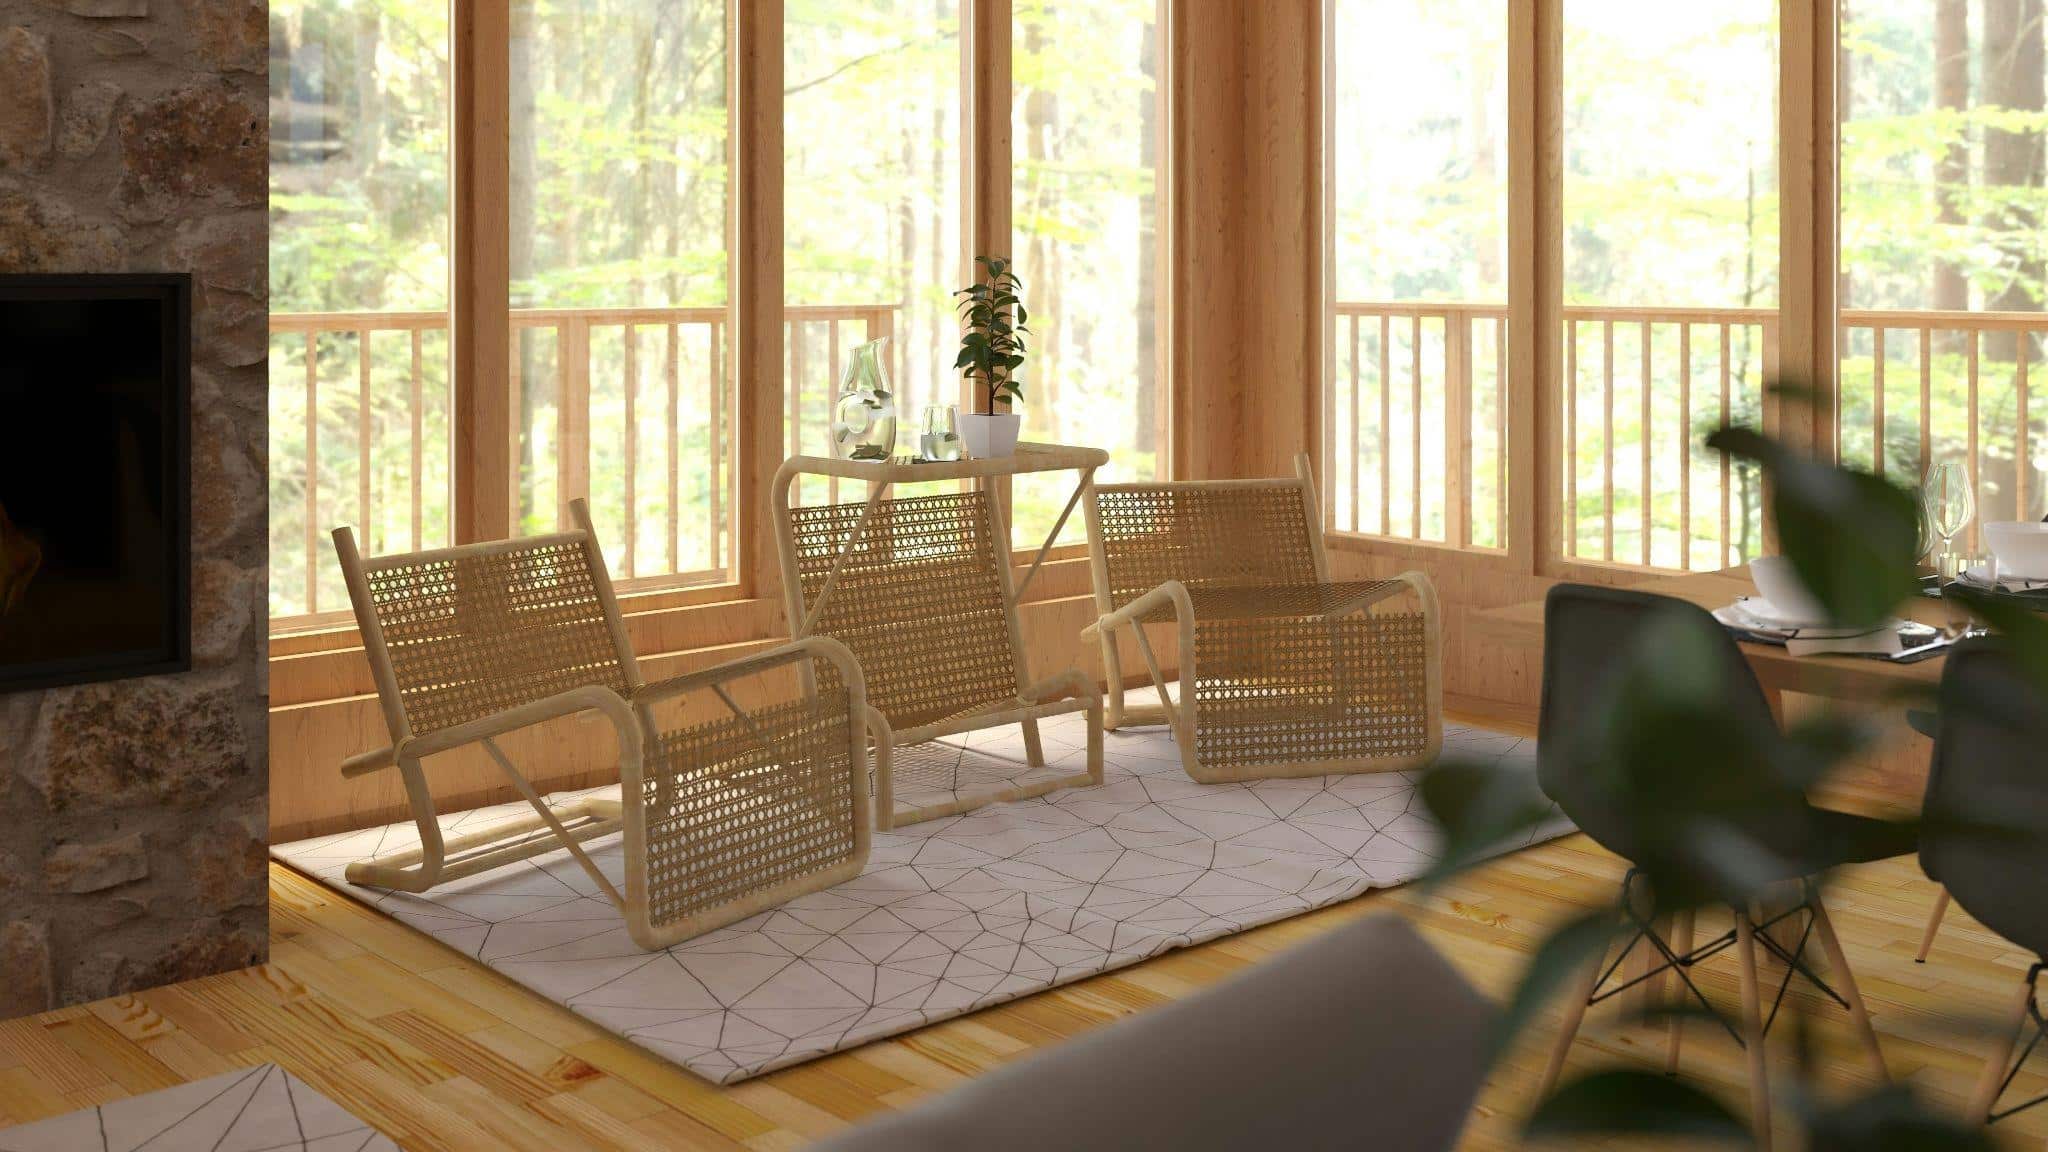 Bringing Rattan Back: How to Style Rattan Furniture in Modern Interiors